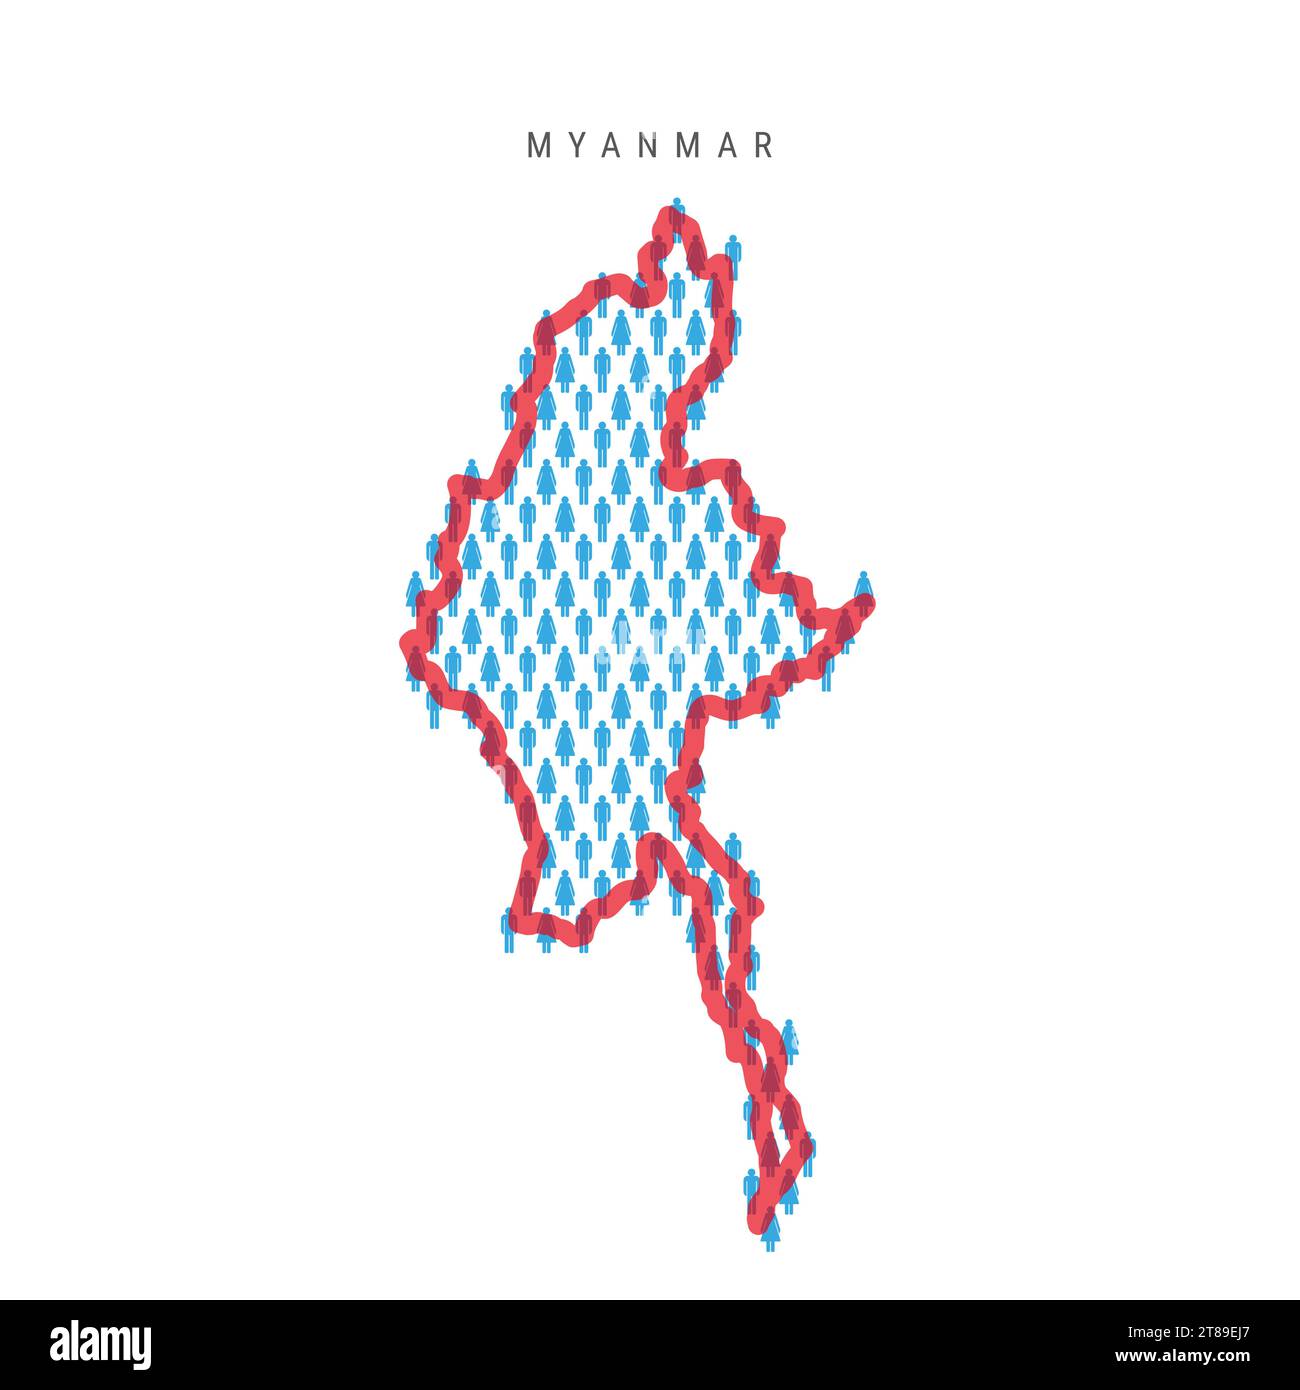 Myanmar population map. Stick figures Burma people map with bold red translucent country border. Pattern of men and women icons. Isolated vector illus Stock Vector